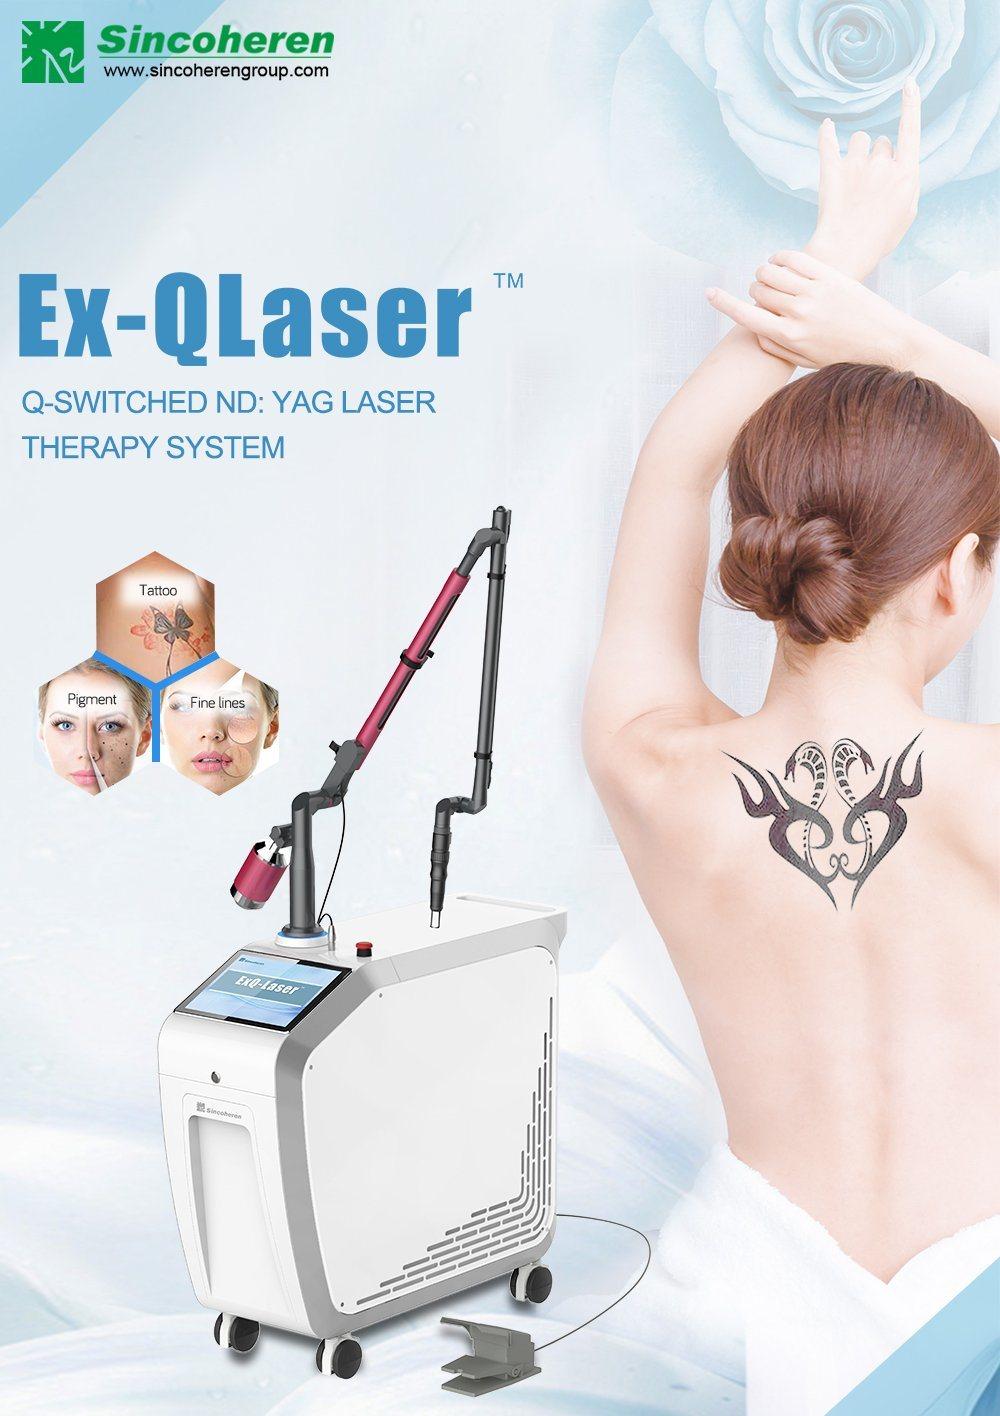 CE Approved Portable ND YAG Laser Tattoo Removal Machine for Pigment and Tattoo Removal